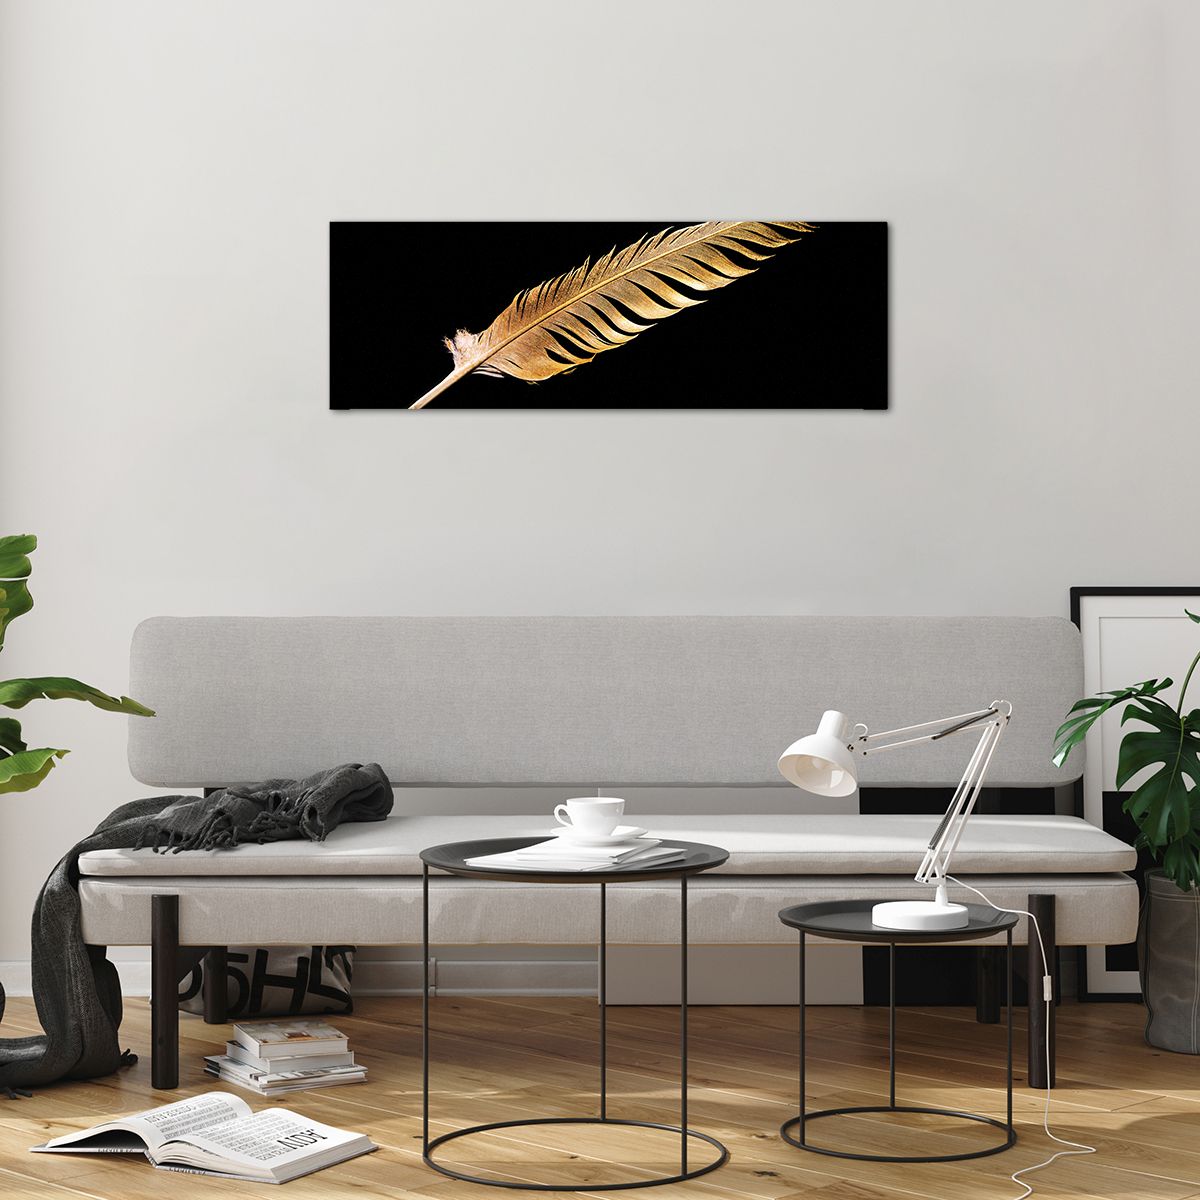 Glass picture  Golden Feather, Glass picture  Bird'S Feather, Glass picture  Art, Glass picture  Gold, Glass picture  Poetry